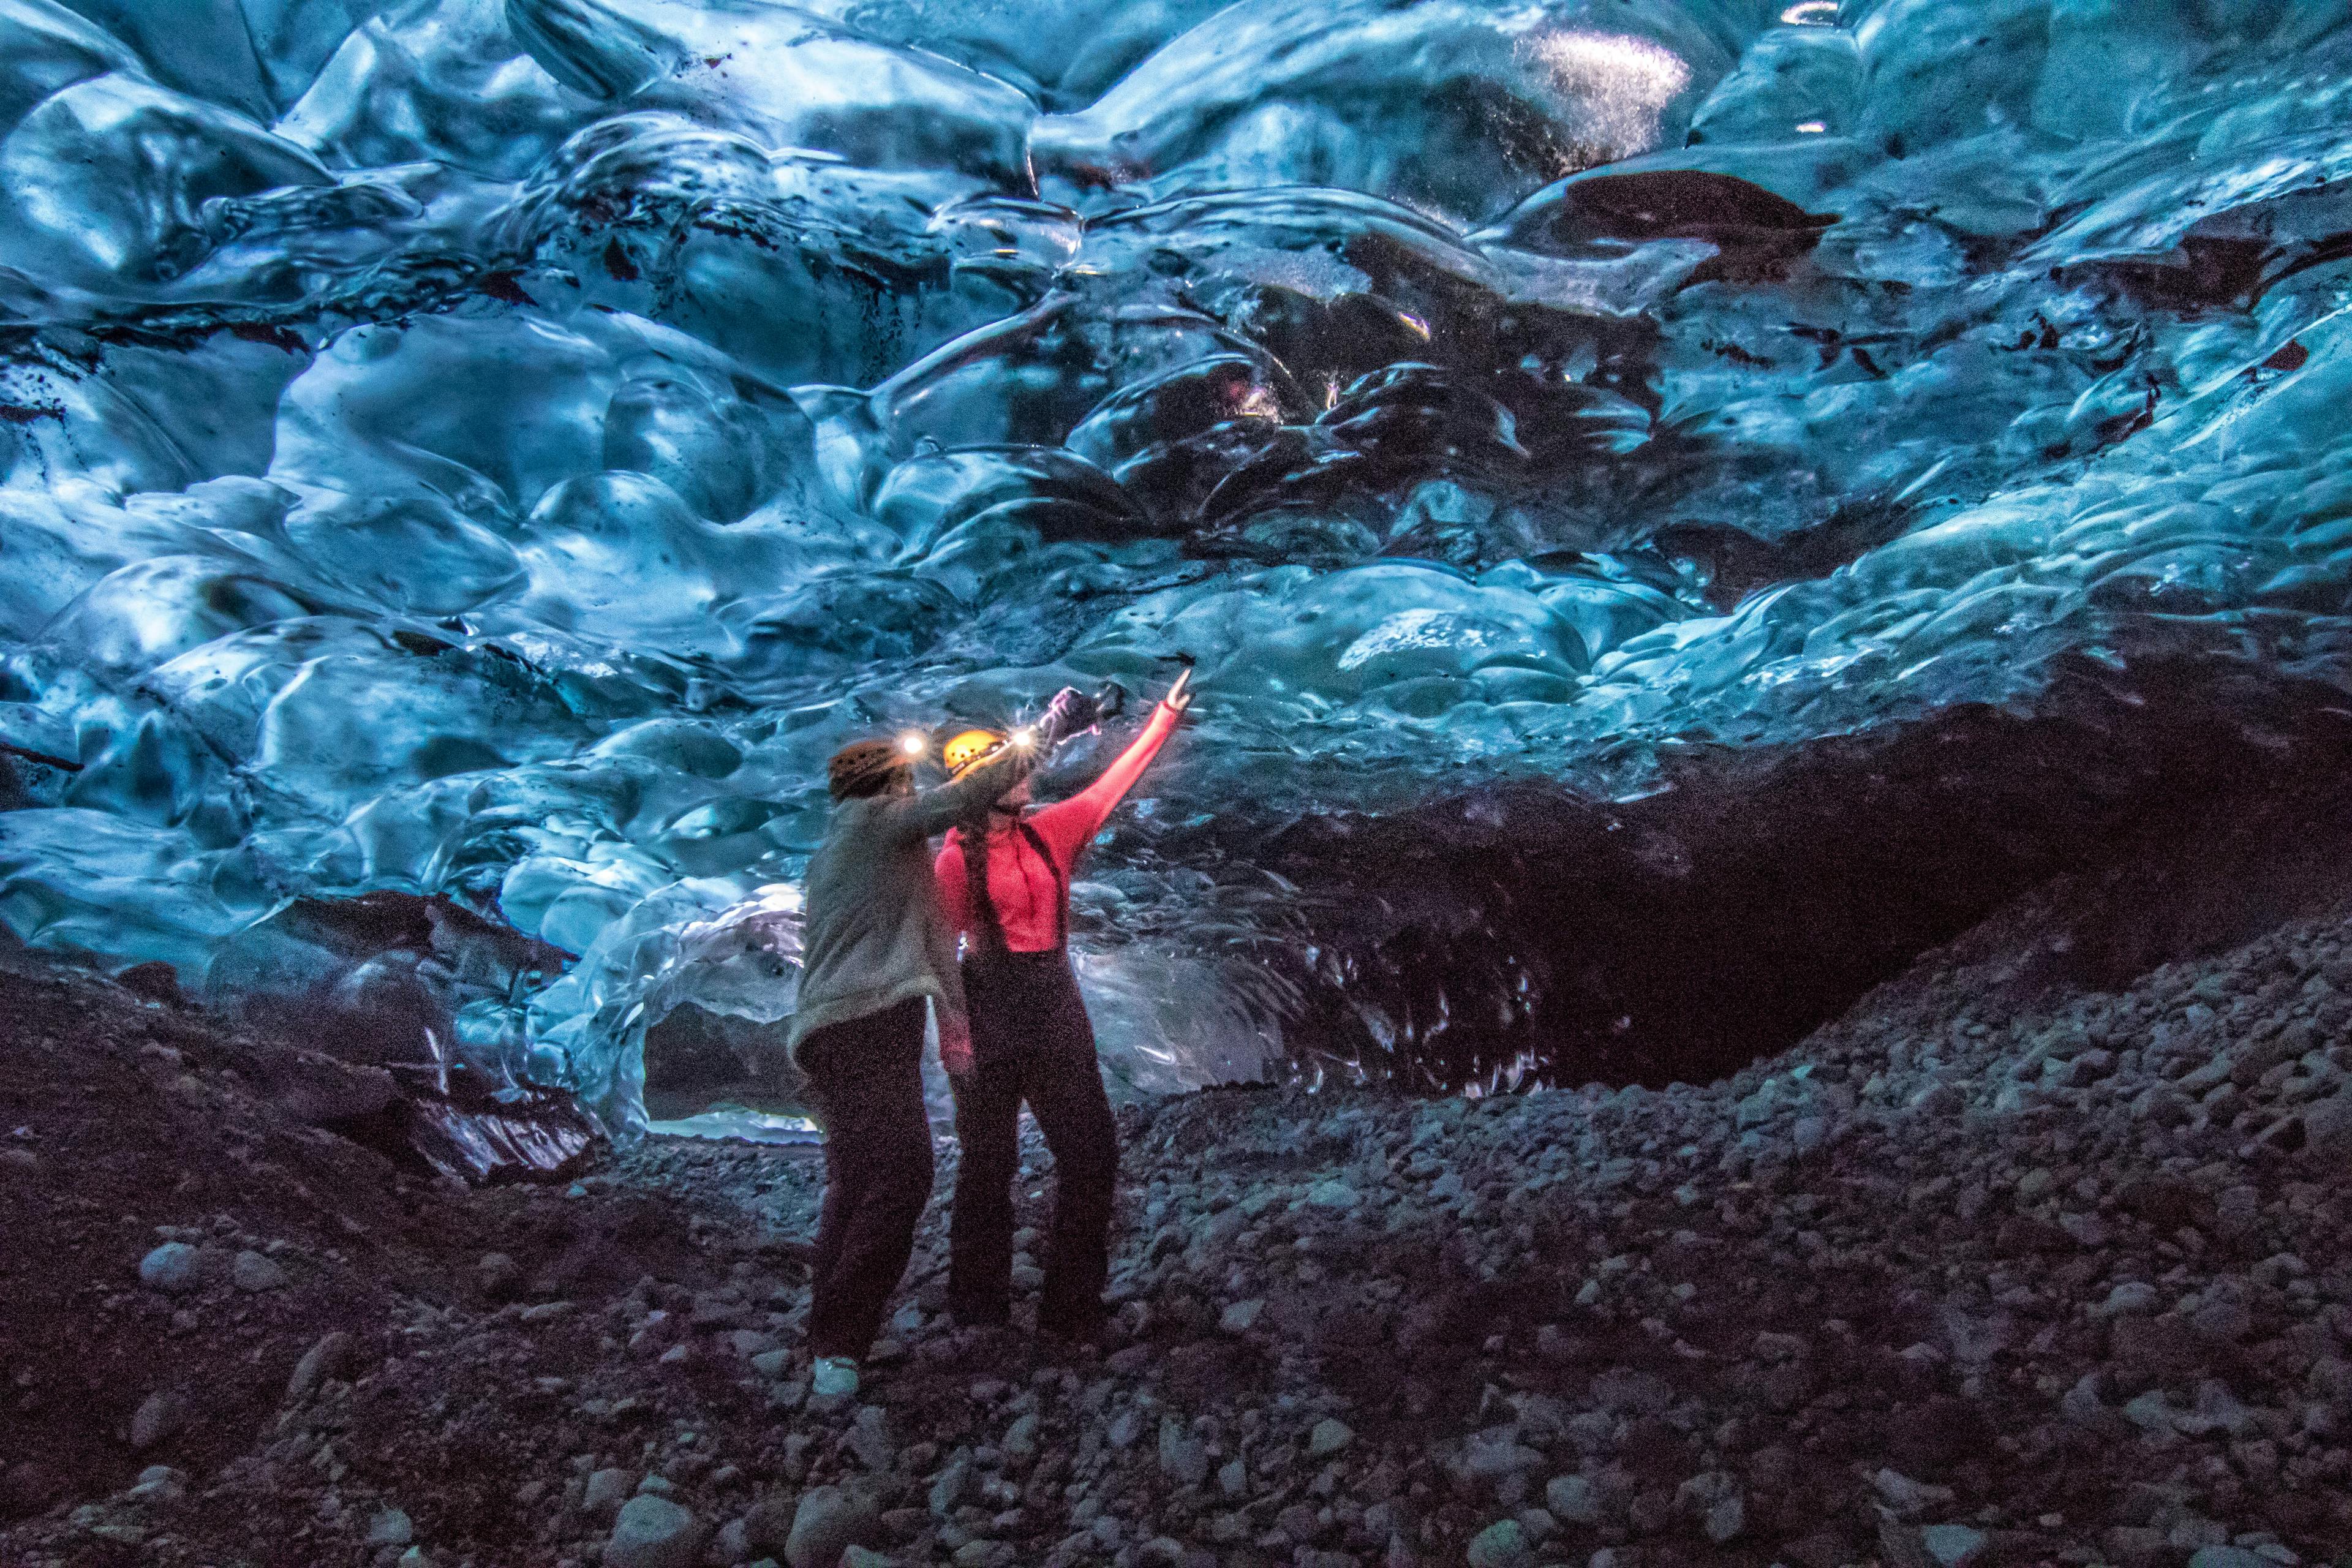 Ice Cave & Helicopter Tour from Skaftafell